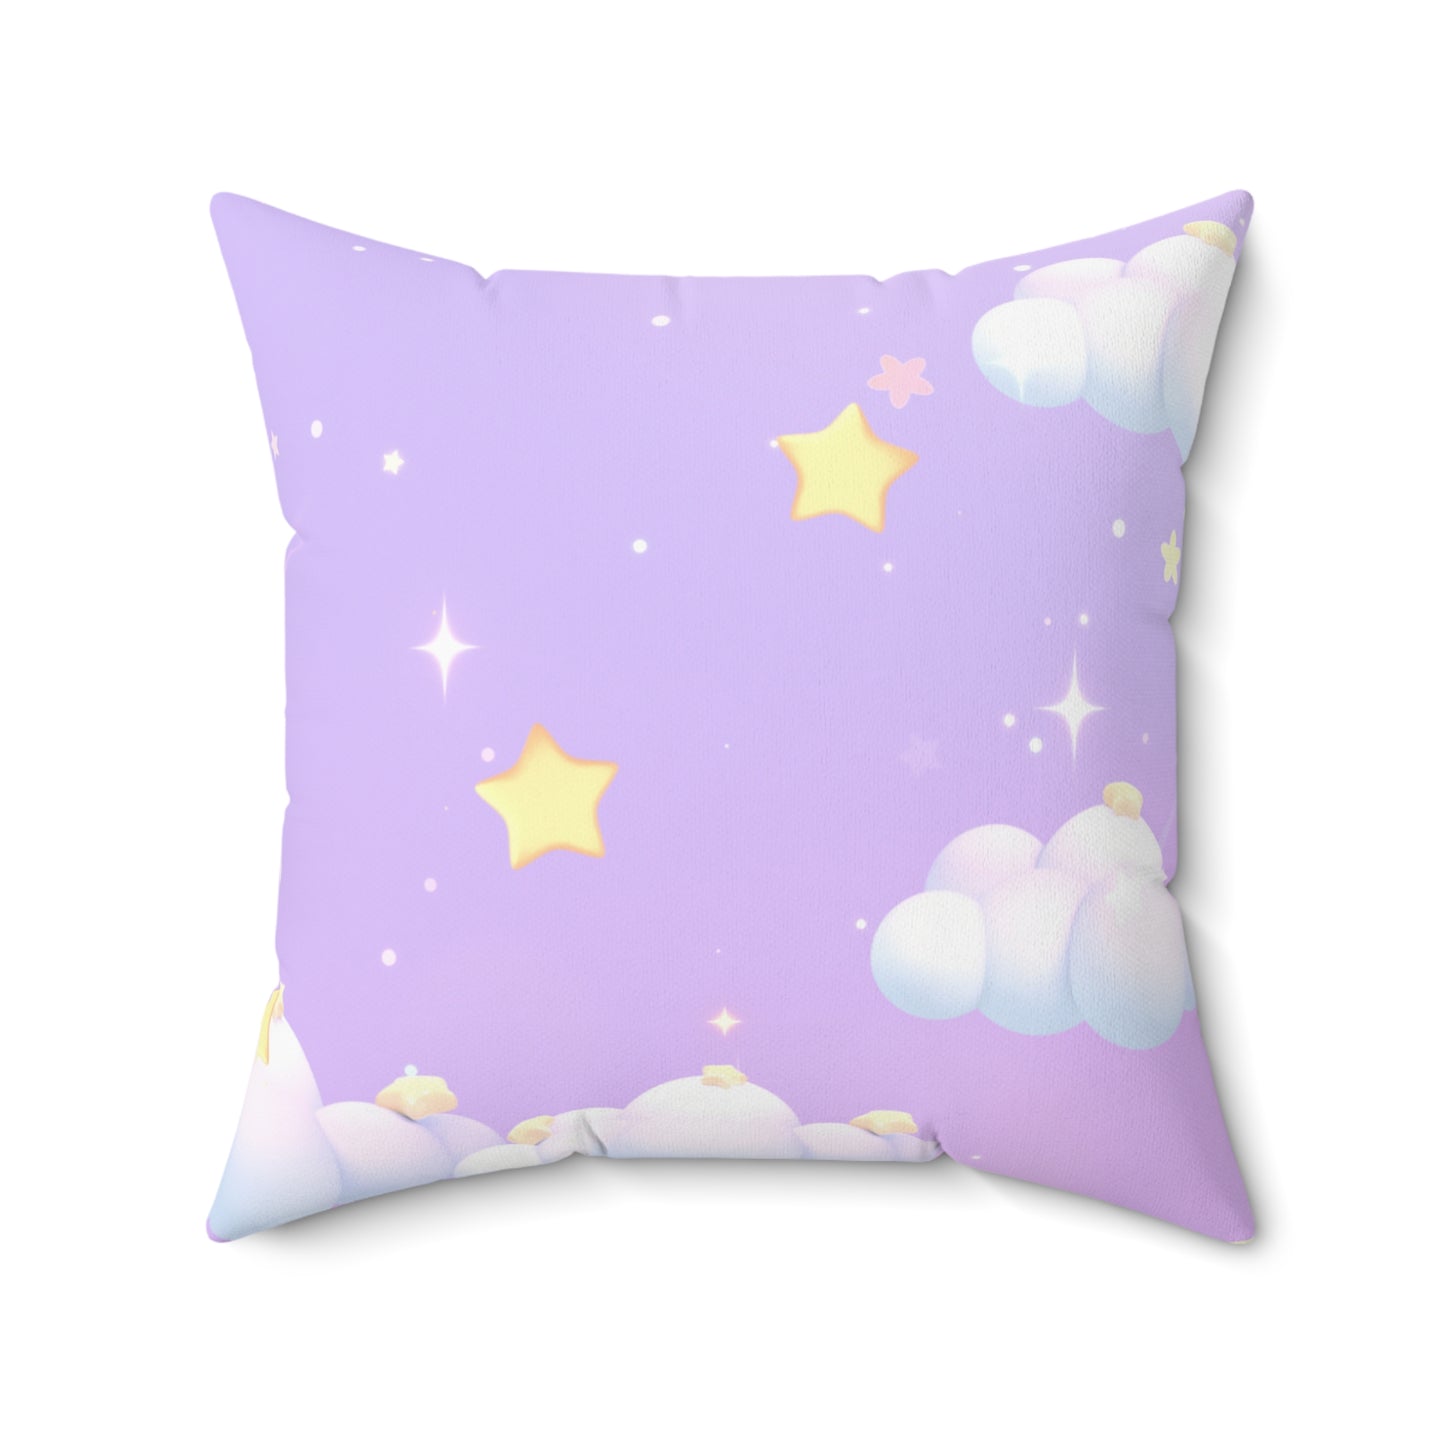 Cloudy Lavender Skies Square Pillow